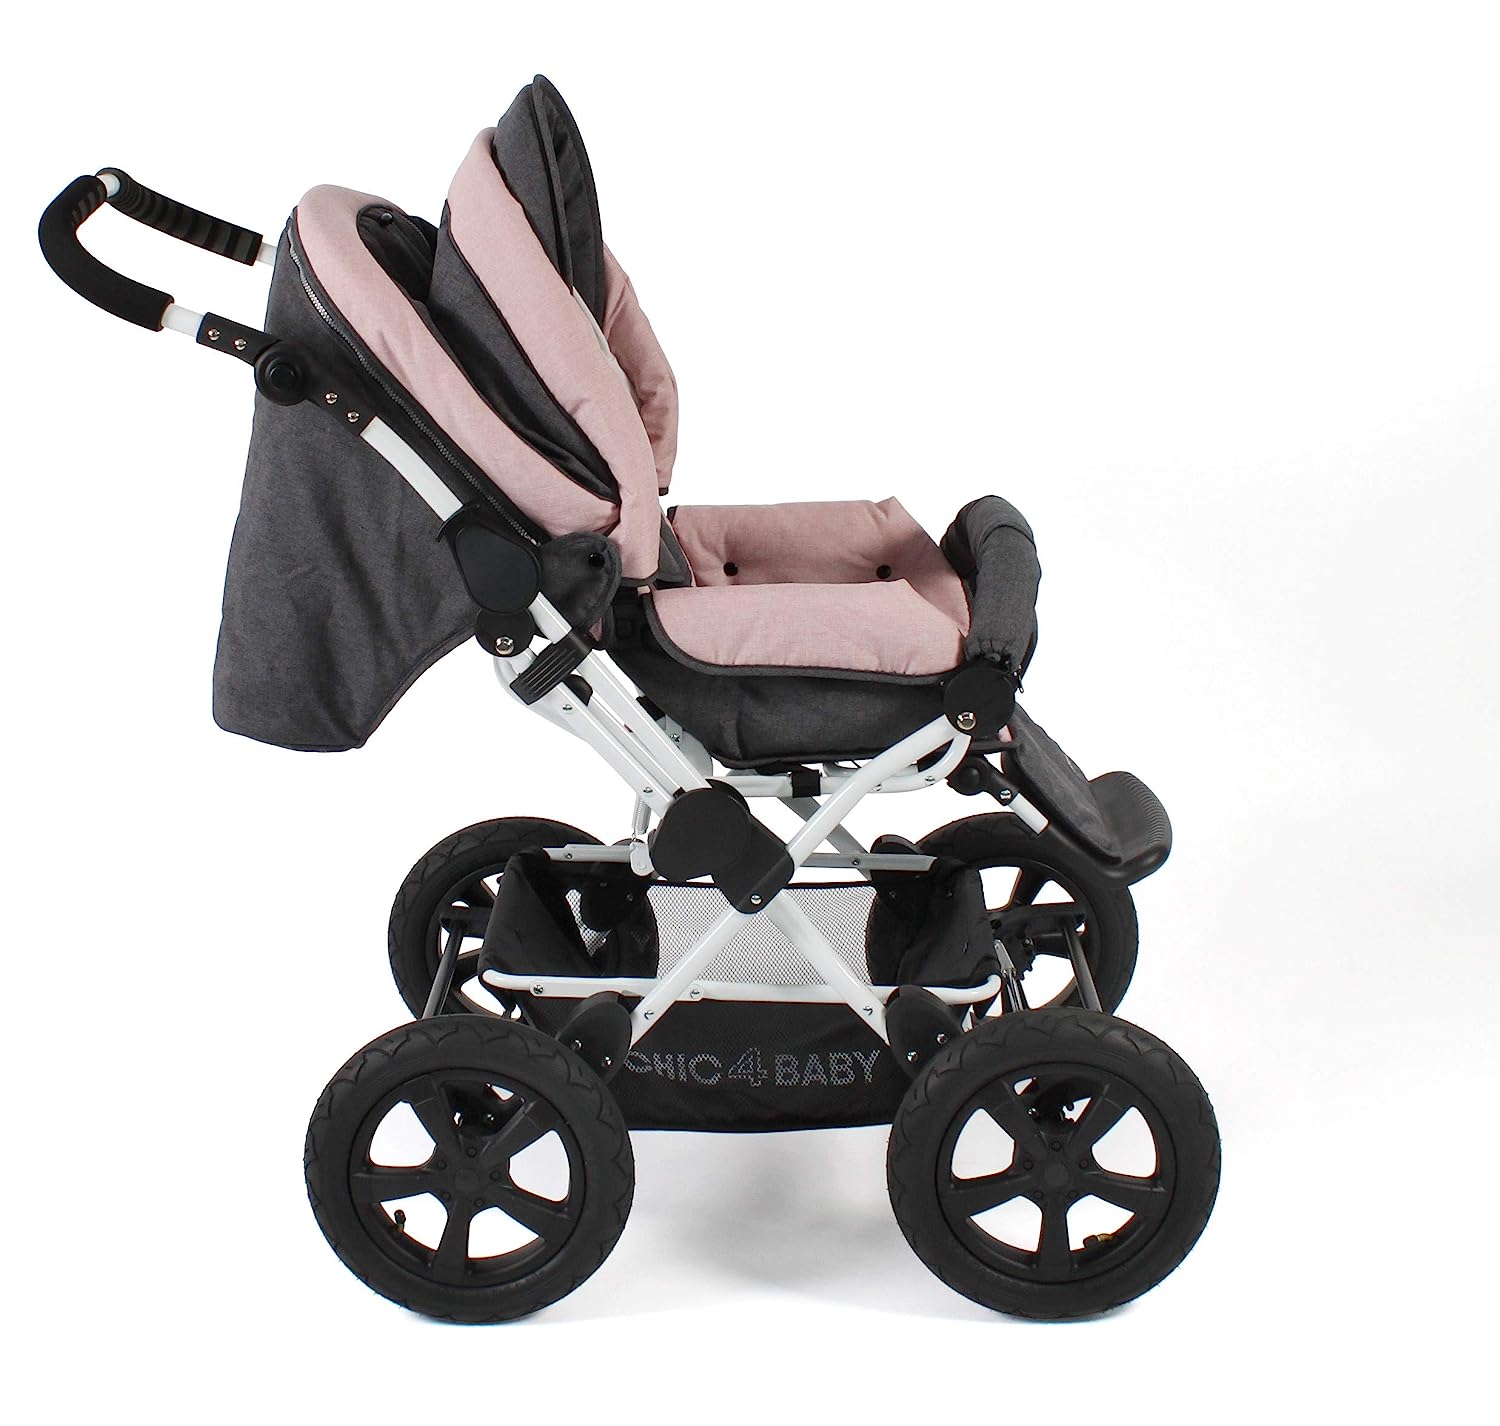 CHIC 4 BABY Viva 100 67 Combi Pushchair with Carry Bag Jeans Melange Grey